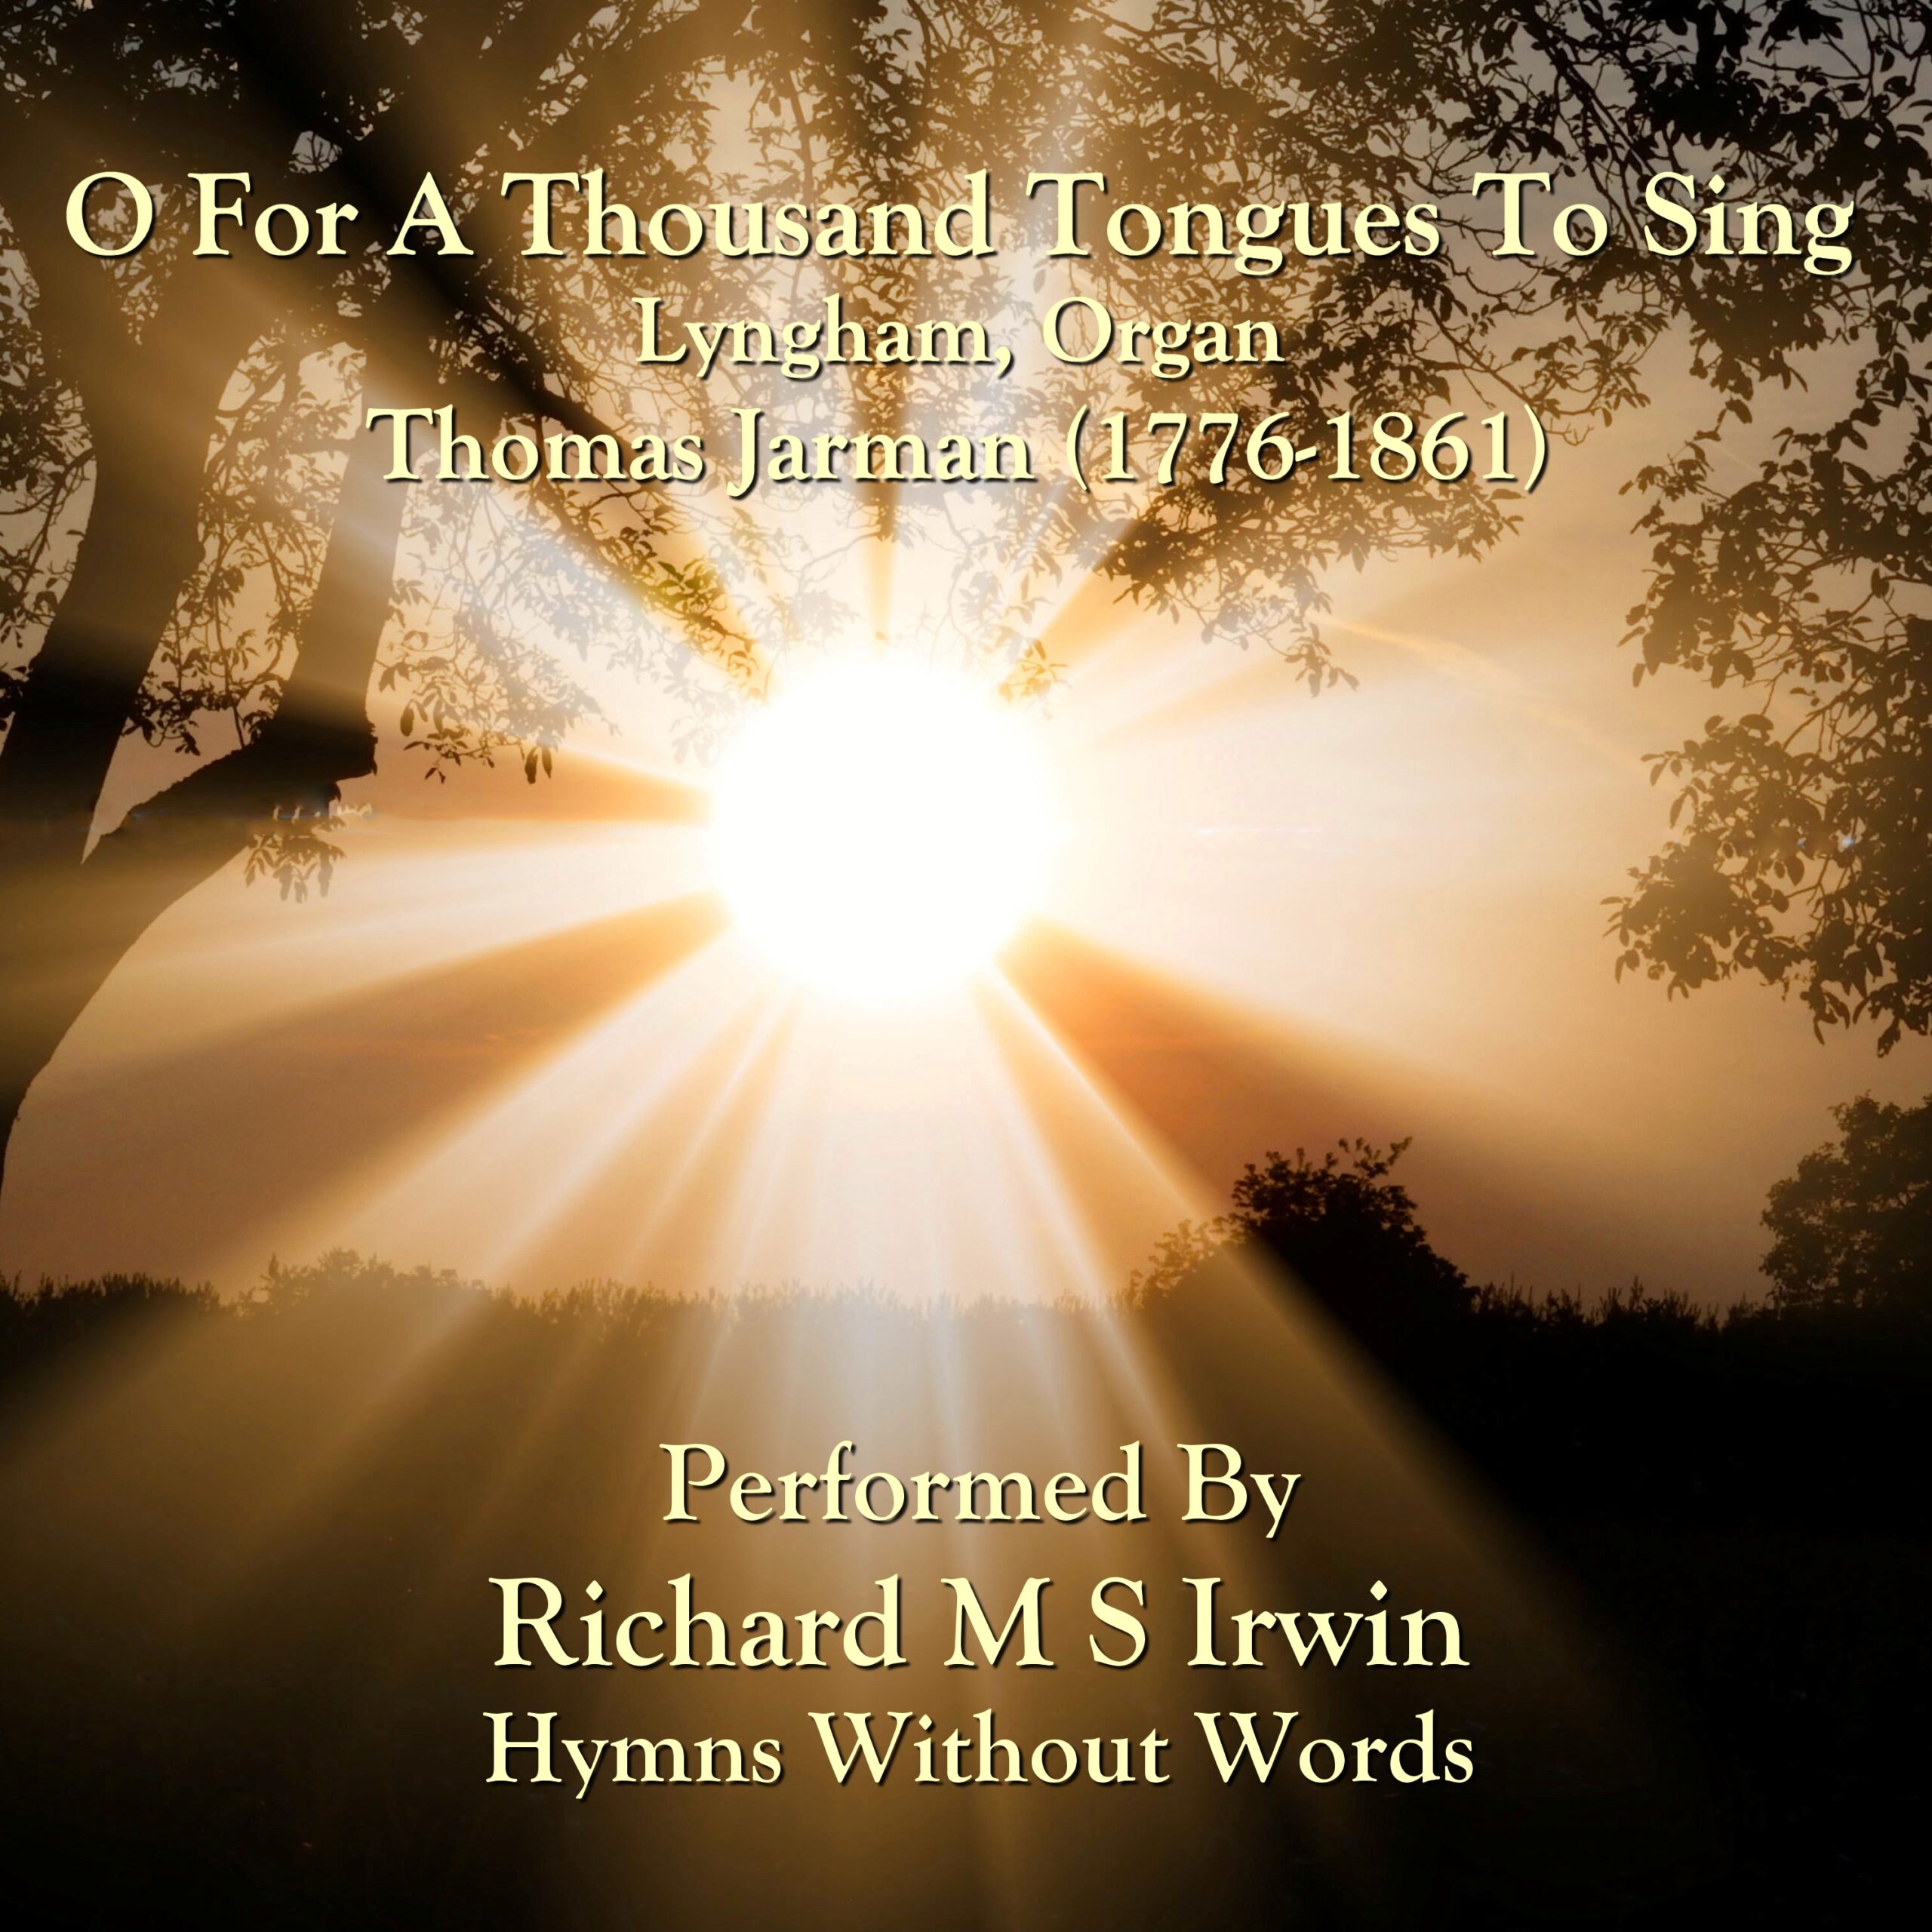 O For A Thousand Tongues To Sing (Lyngham, Organ, 6 Verses)